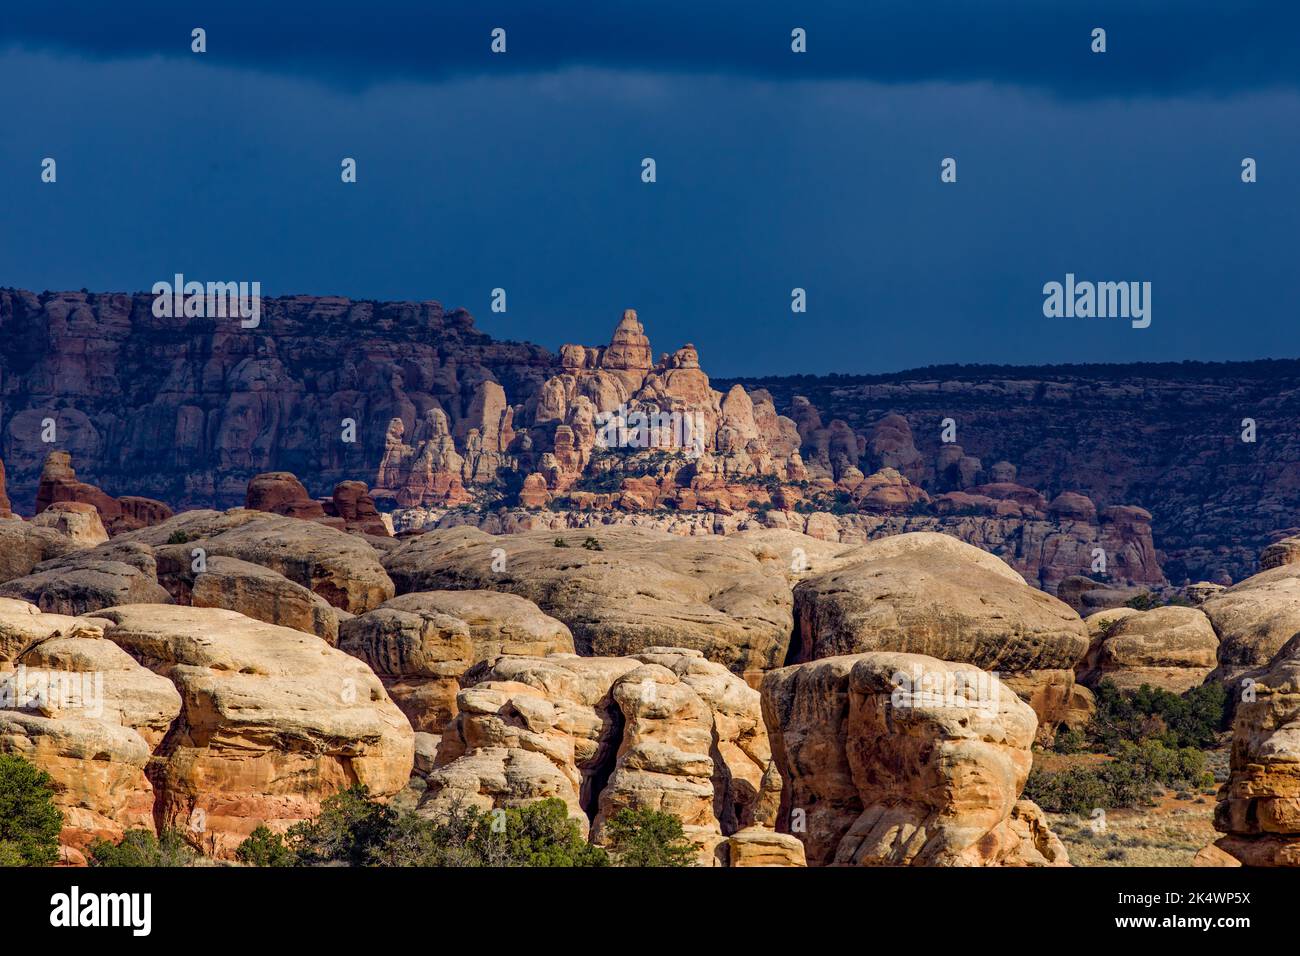 Storm light on Cedar Mesa sandstone formations in the Needles District, Canyonlands National Park, Utah. Stock Photo